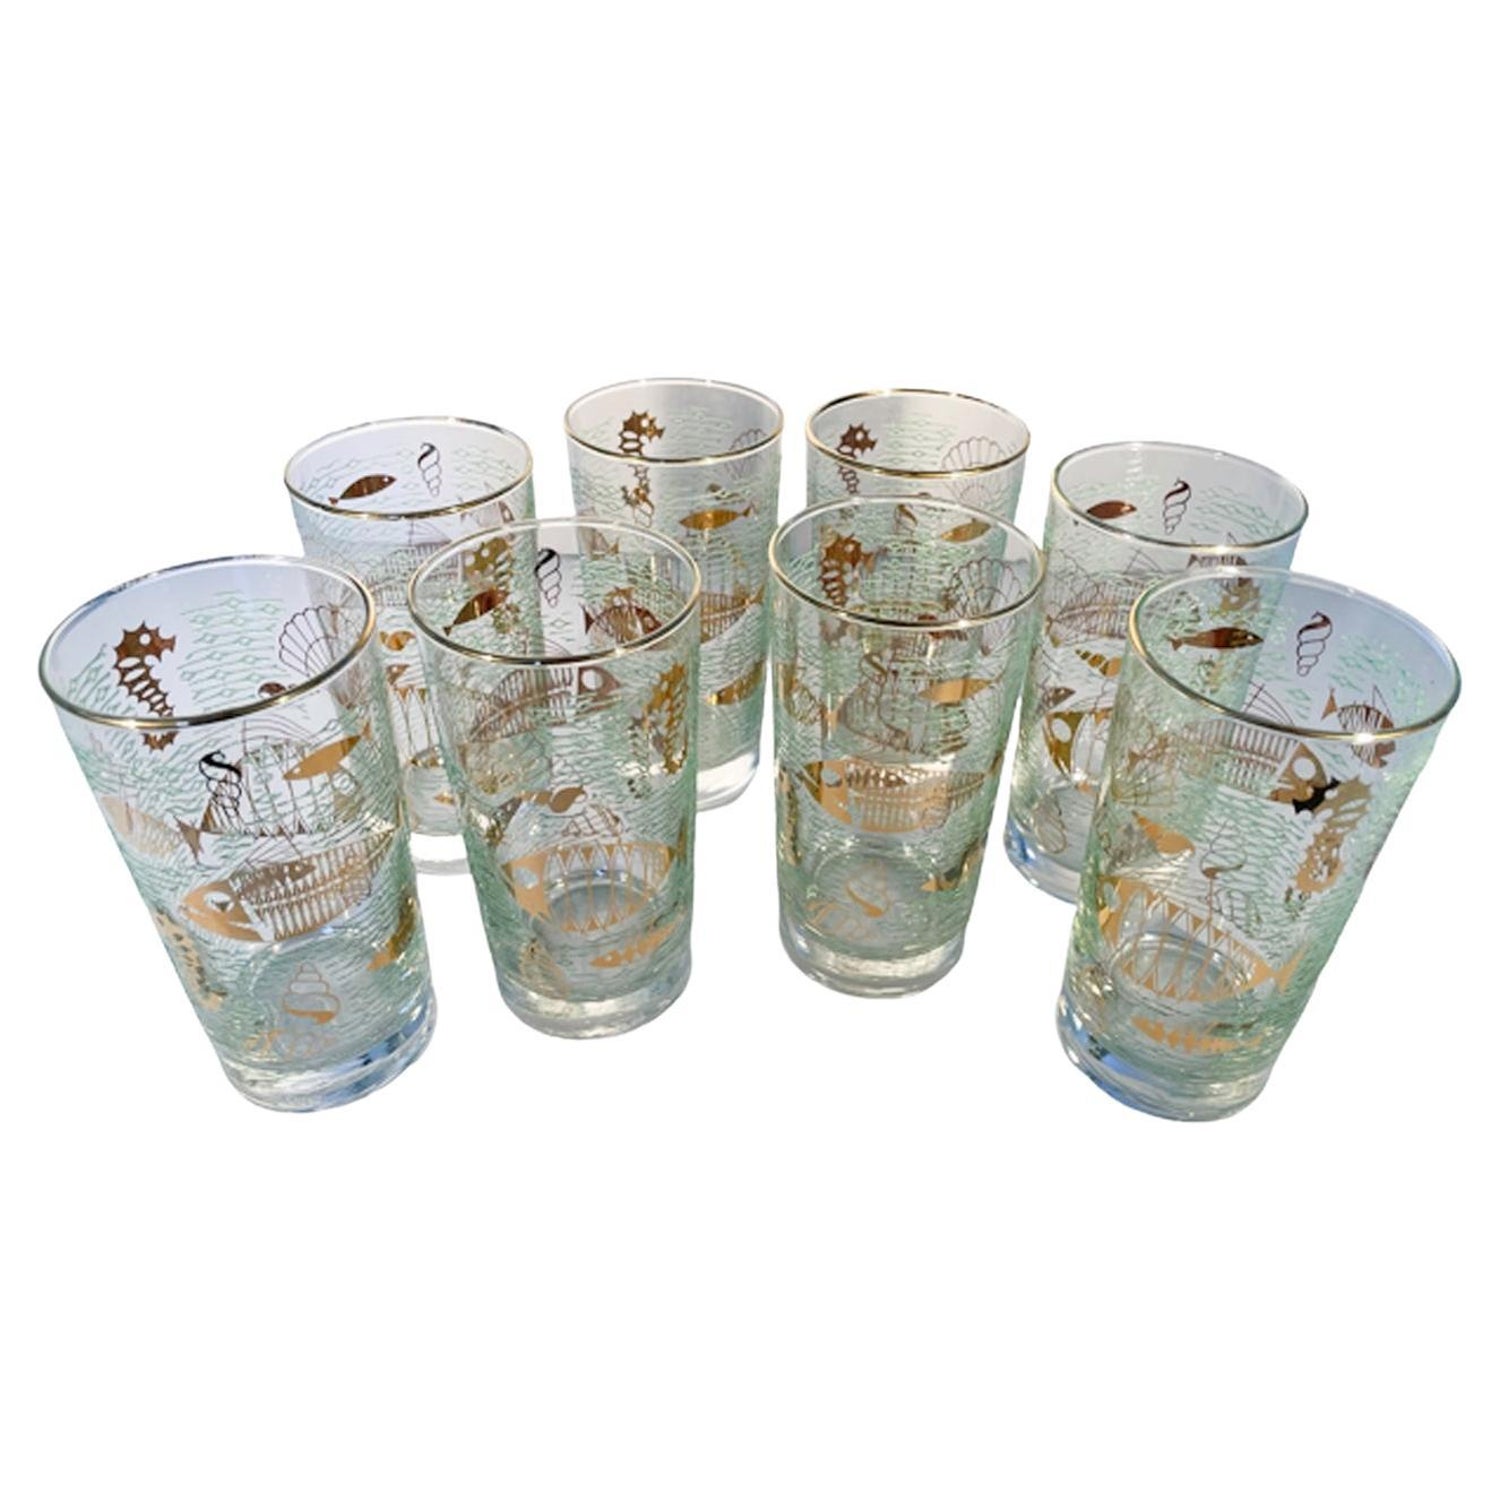 Mixed Set of 6 Libbey Windsor Highball and Double Shot Glasses Drinking  Tumbler Juice Glass MCM Barware Vintage Cocktail Glasses 